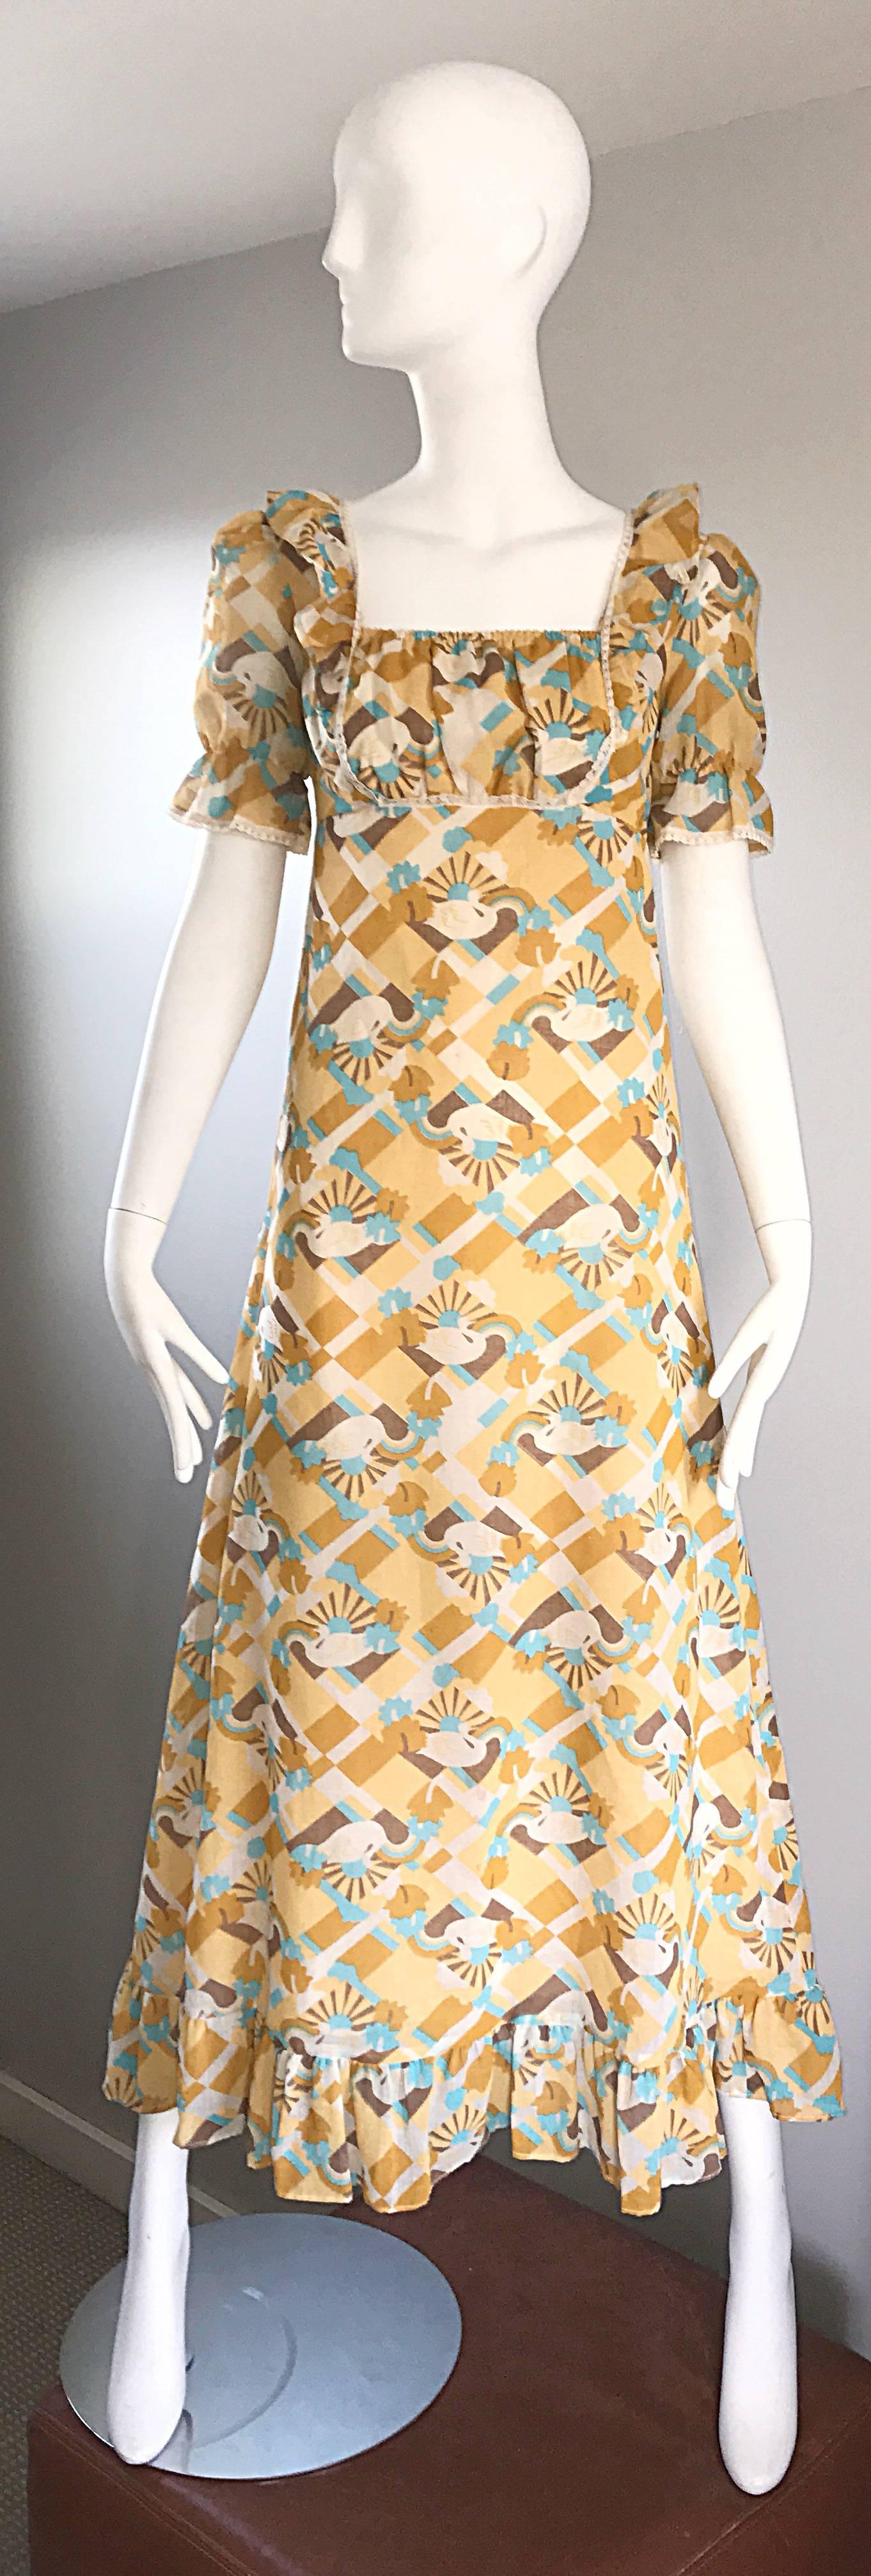 1970s Swan Print Novelty Cotton Boho Vintage 70s Blue and Yellow Maxi Dress  For Sale 3